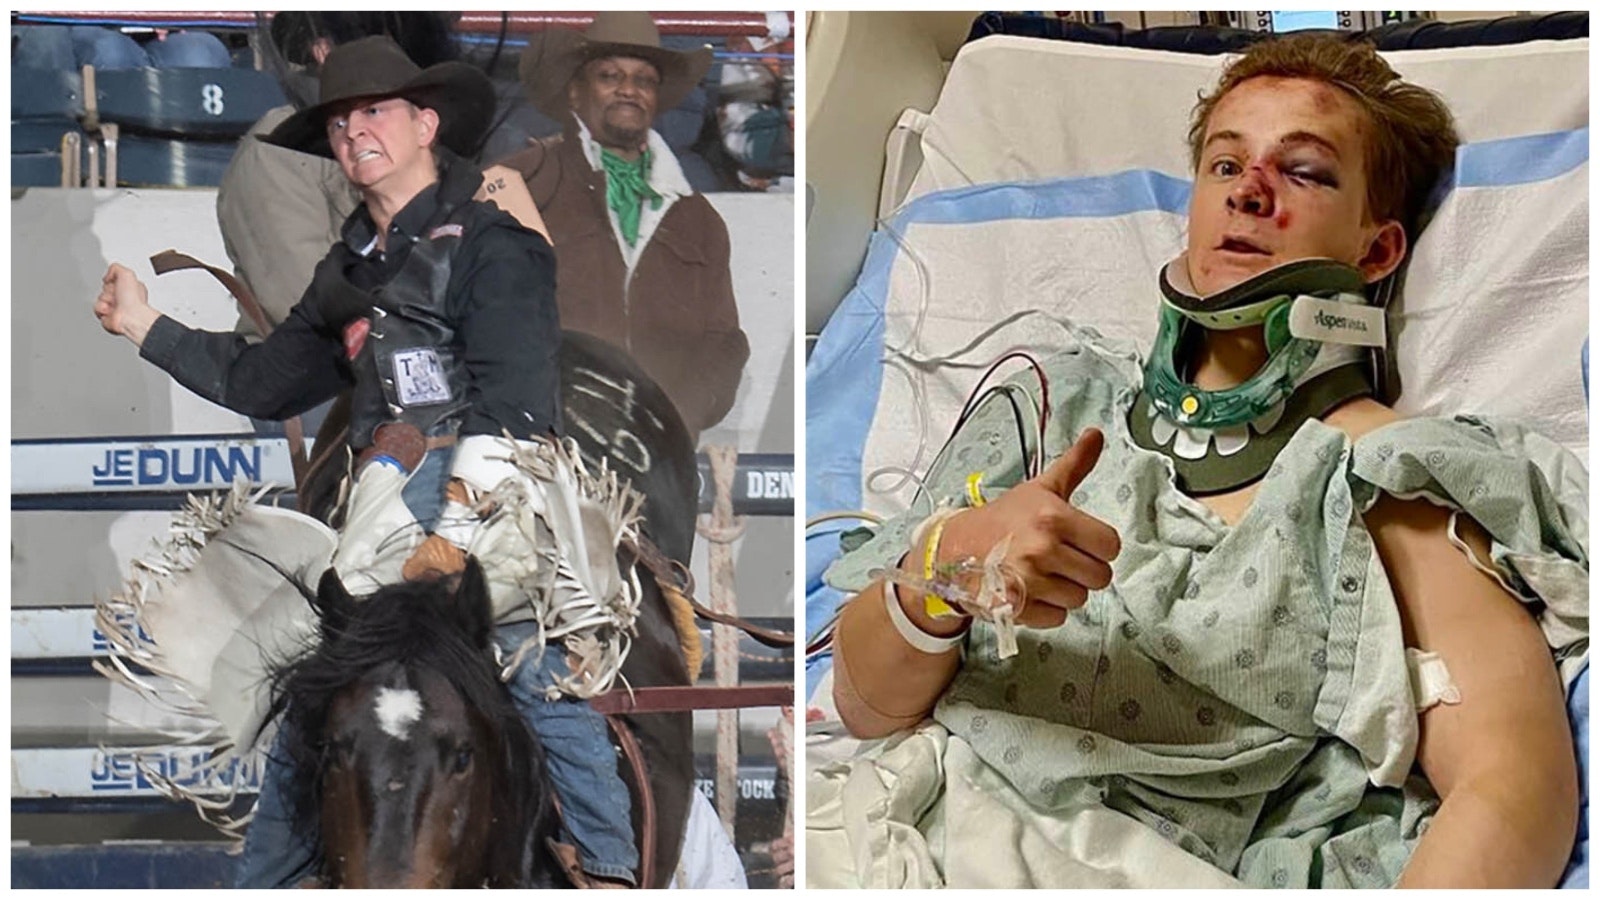 Left, Austin Broderson, a 19-year-old Casper College student, comes out of the chute on Jack Dupp during a ride in the National Western Stock Show Rodeo in Denver on Jan. 15, 2023. After finishing his 8-second ride, Broderson's rigging slipped and he was drug and trampled by the horse. He survived and is recovering in a Denver hospital. Right, Broderson gives a thumbs up from a hospital bed in Denver